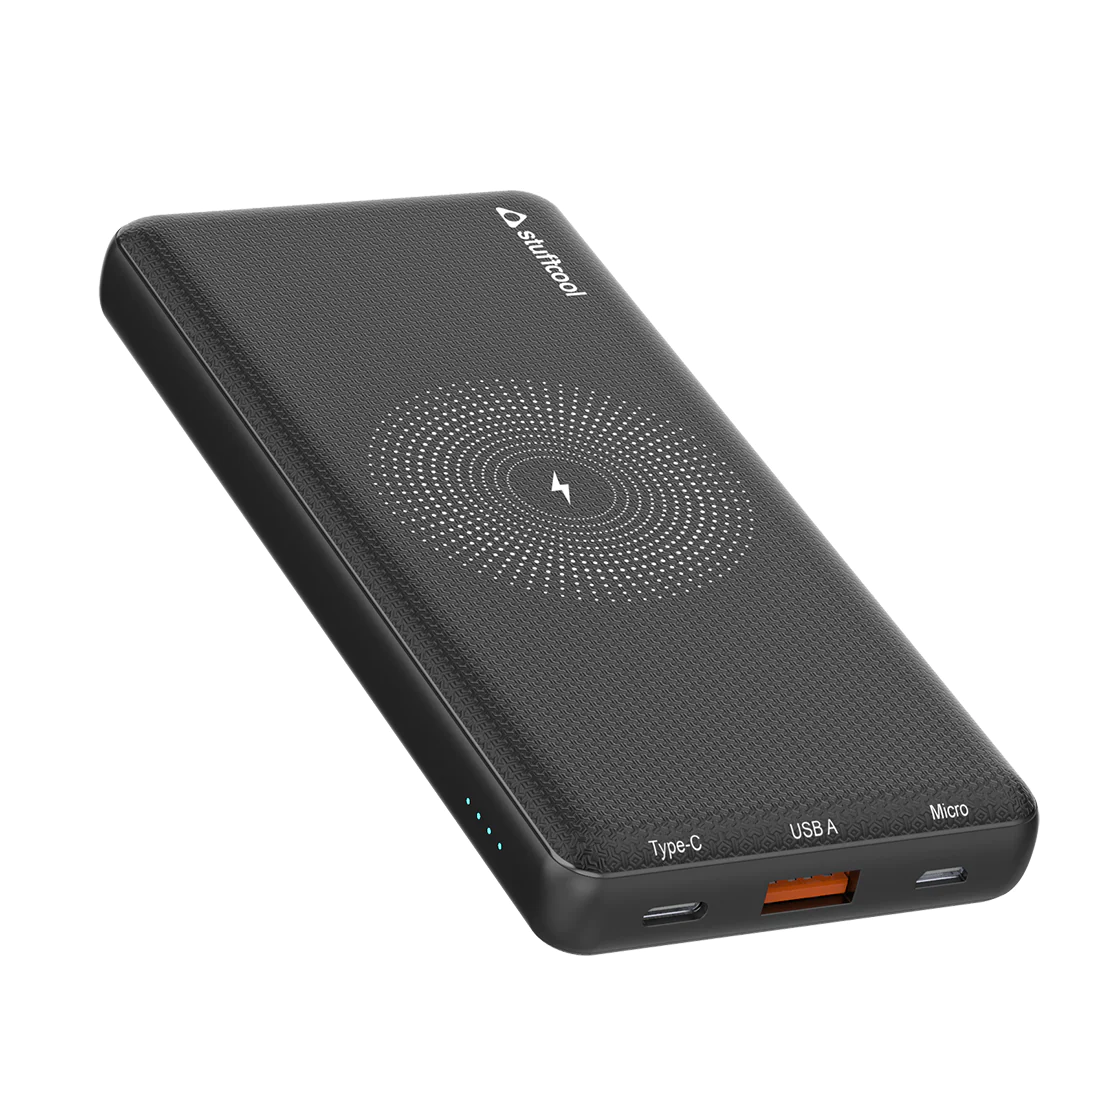 Wireless Powerbank 2 Shop Mobile Accessories Online in India